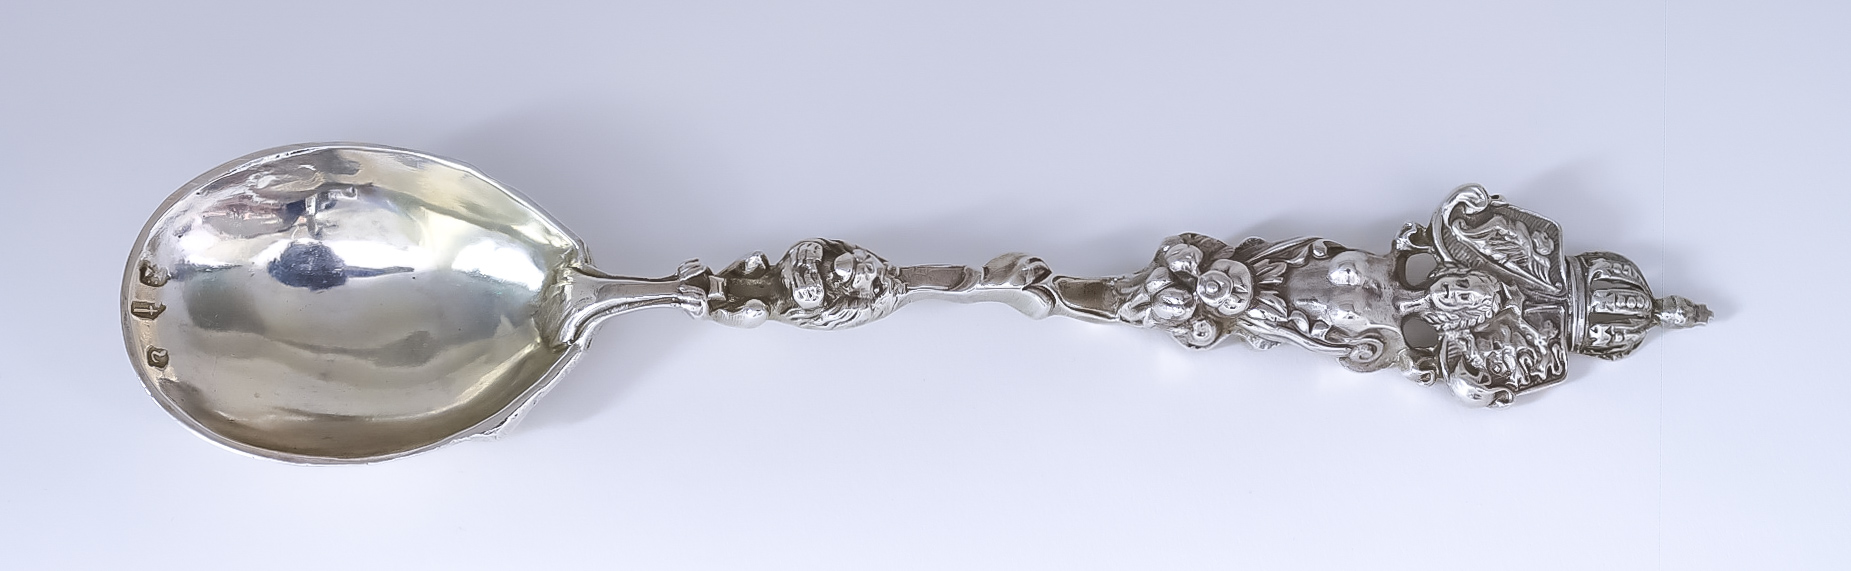 A 19th Century Continental Silver Spoon, possibly Dutch, with import marks for Louis Landsberg,